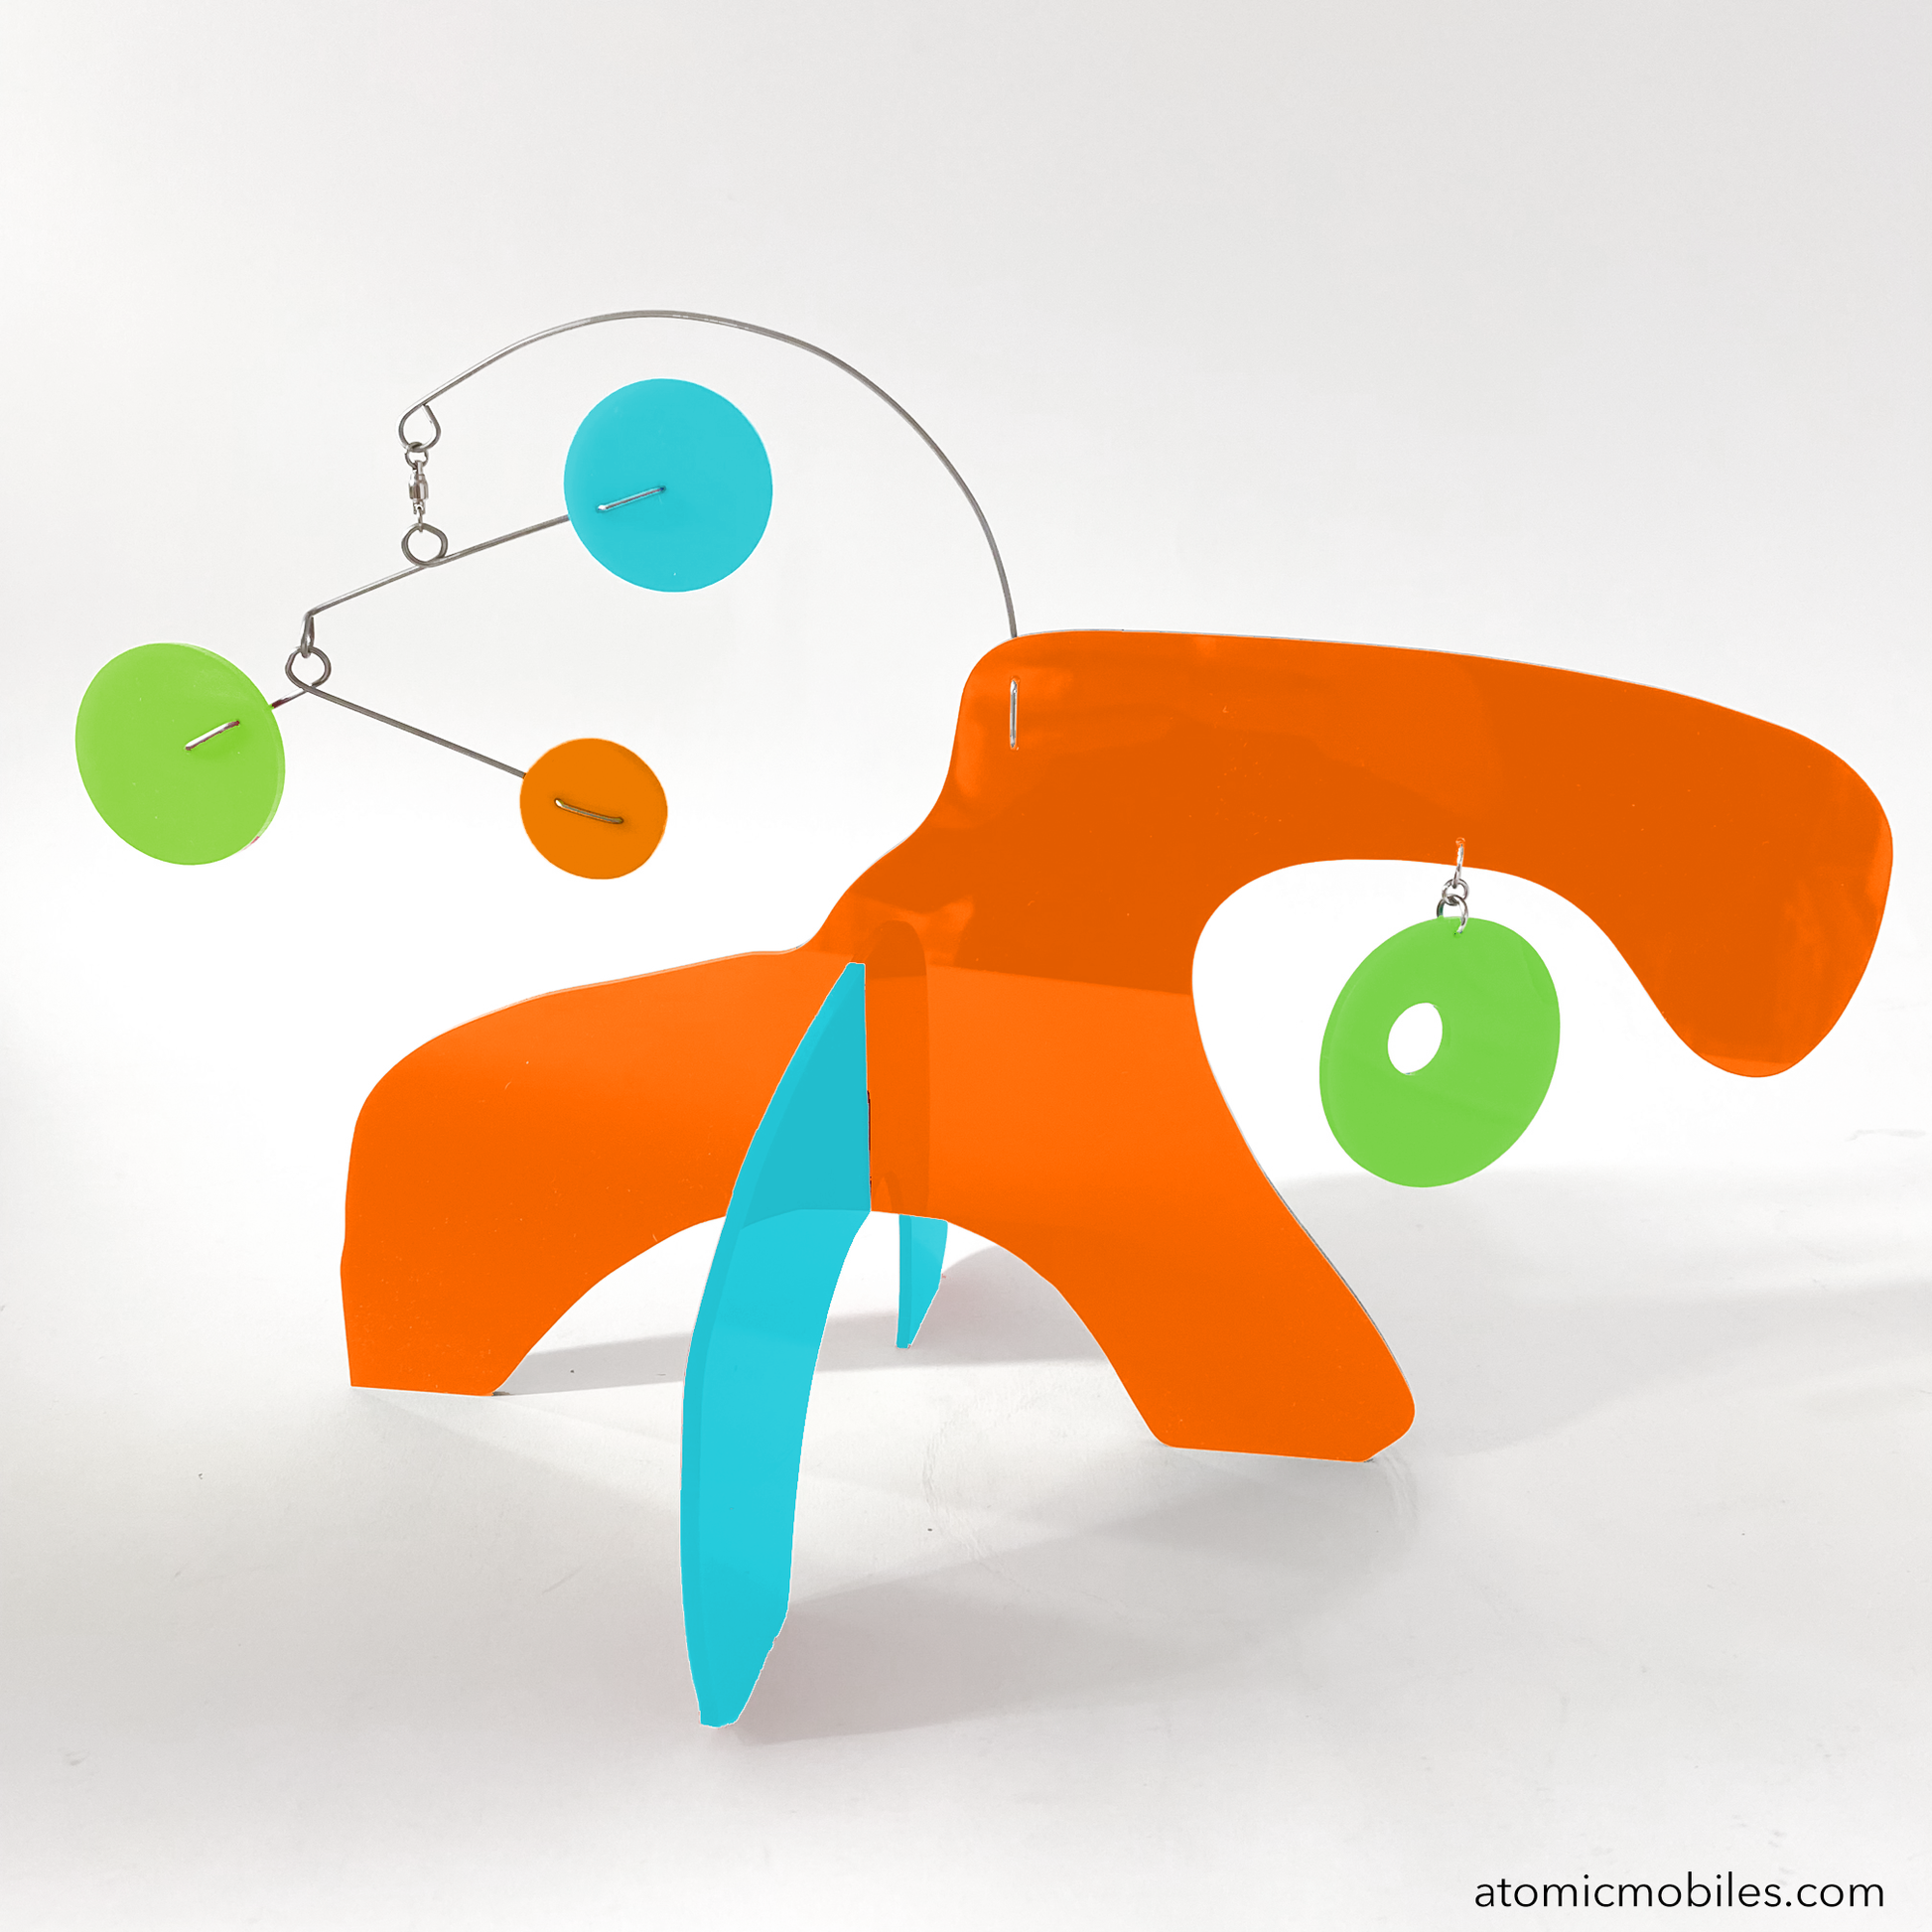 KinetiCats Collection Turtle in Palm Springs Mid Century Modern Colors Of Orange, Aqua Blue, and Lime Green - one of 12 Modern Cute Abstract Animal Art Sculpture Kinetic Stabiles inspired by Dada and mid century modern style art by AtomicMobiles.com